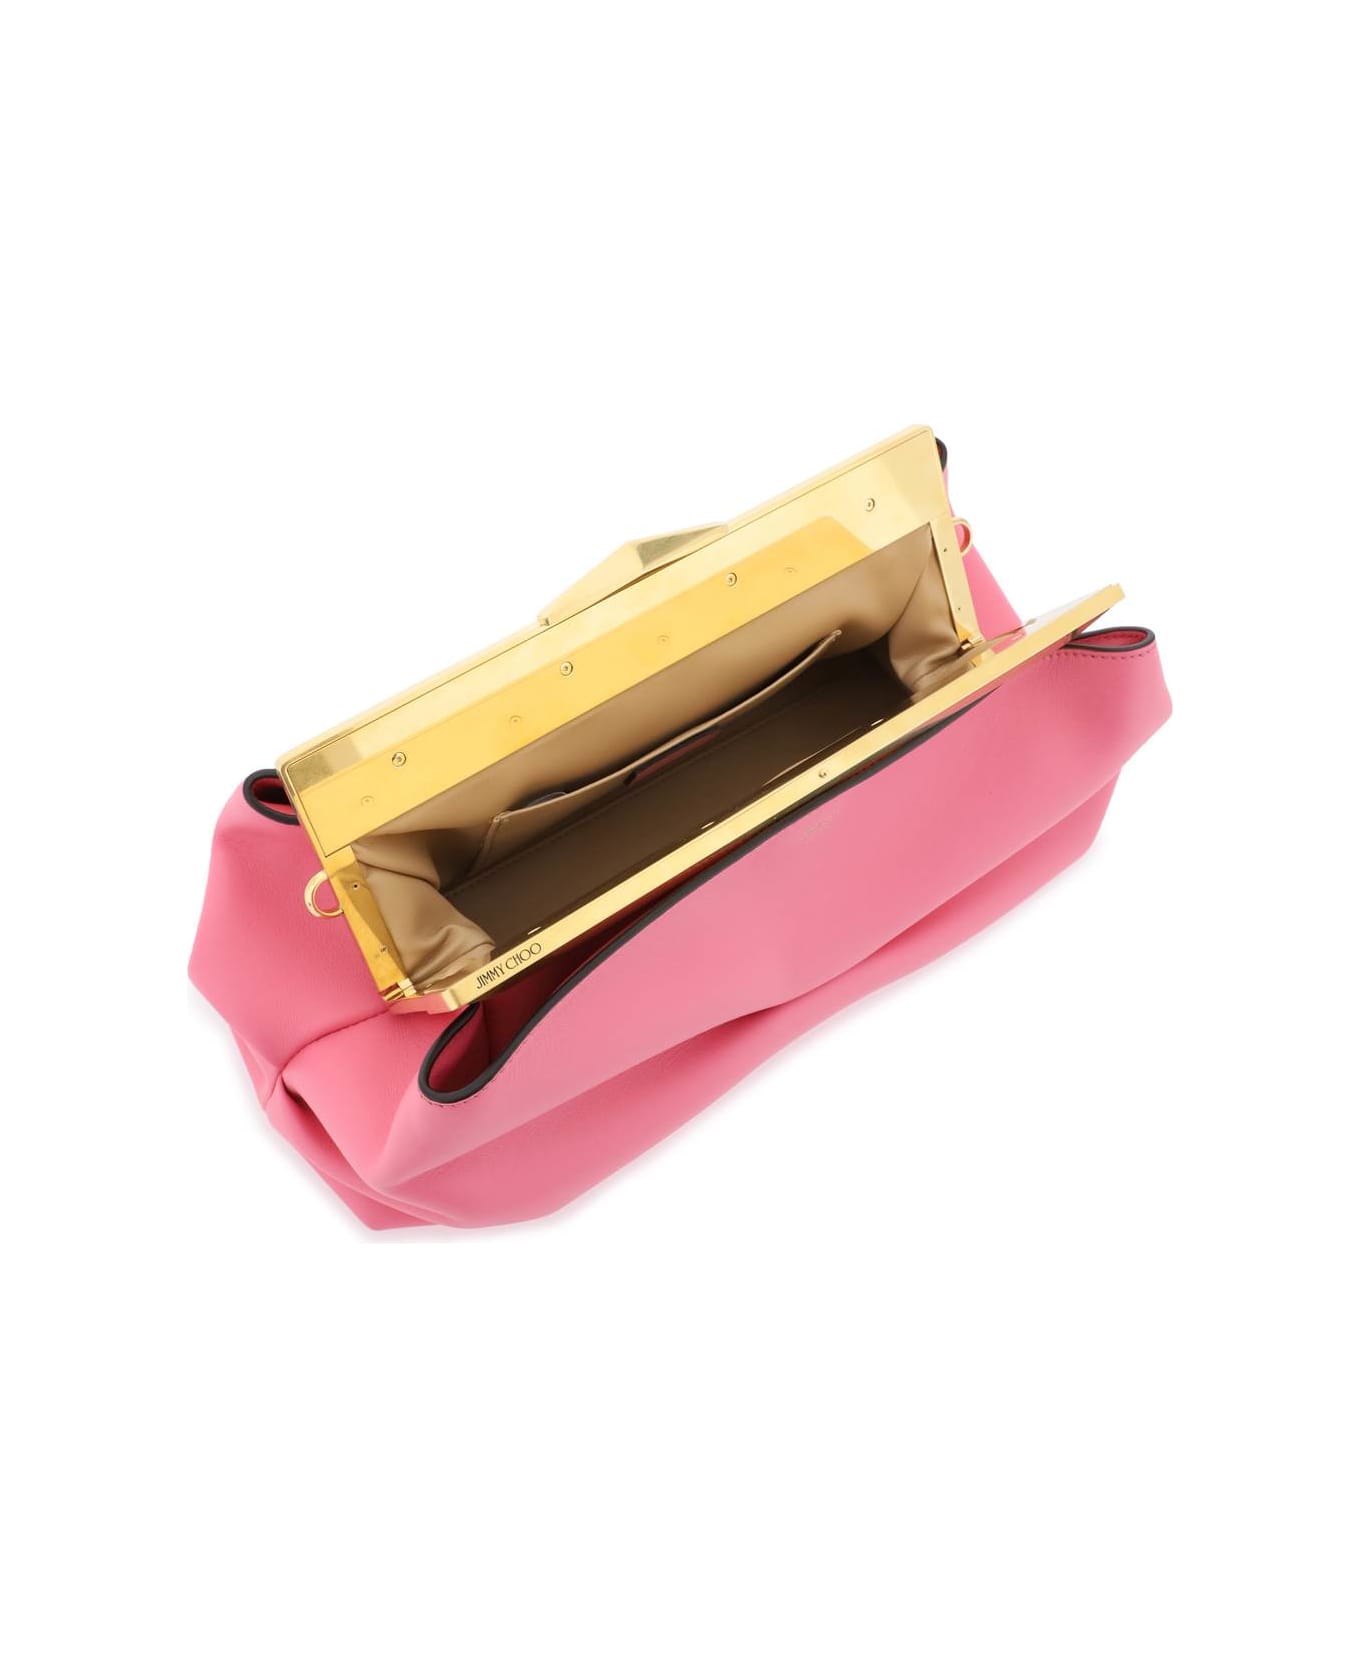 Jimmy Choo Leather Diamond Frame Clutch - CANDY PINK GOLD (Pink)